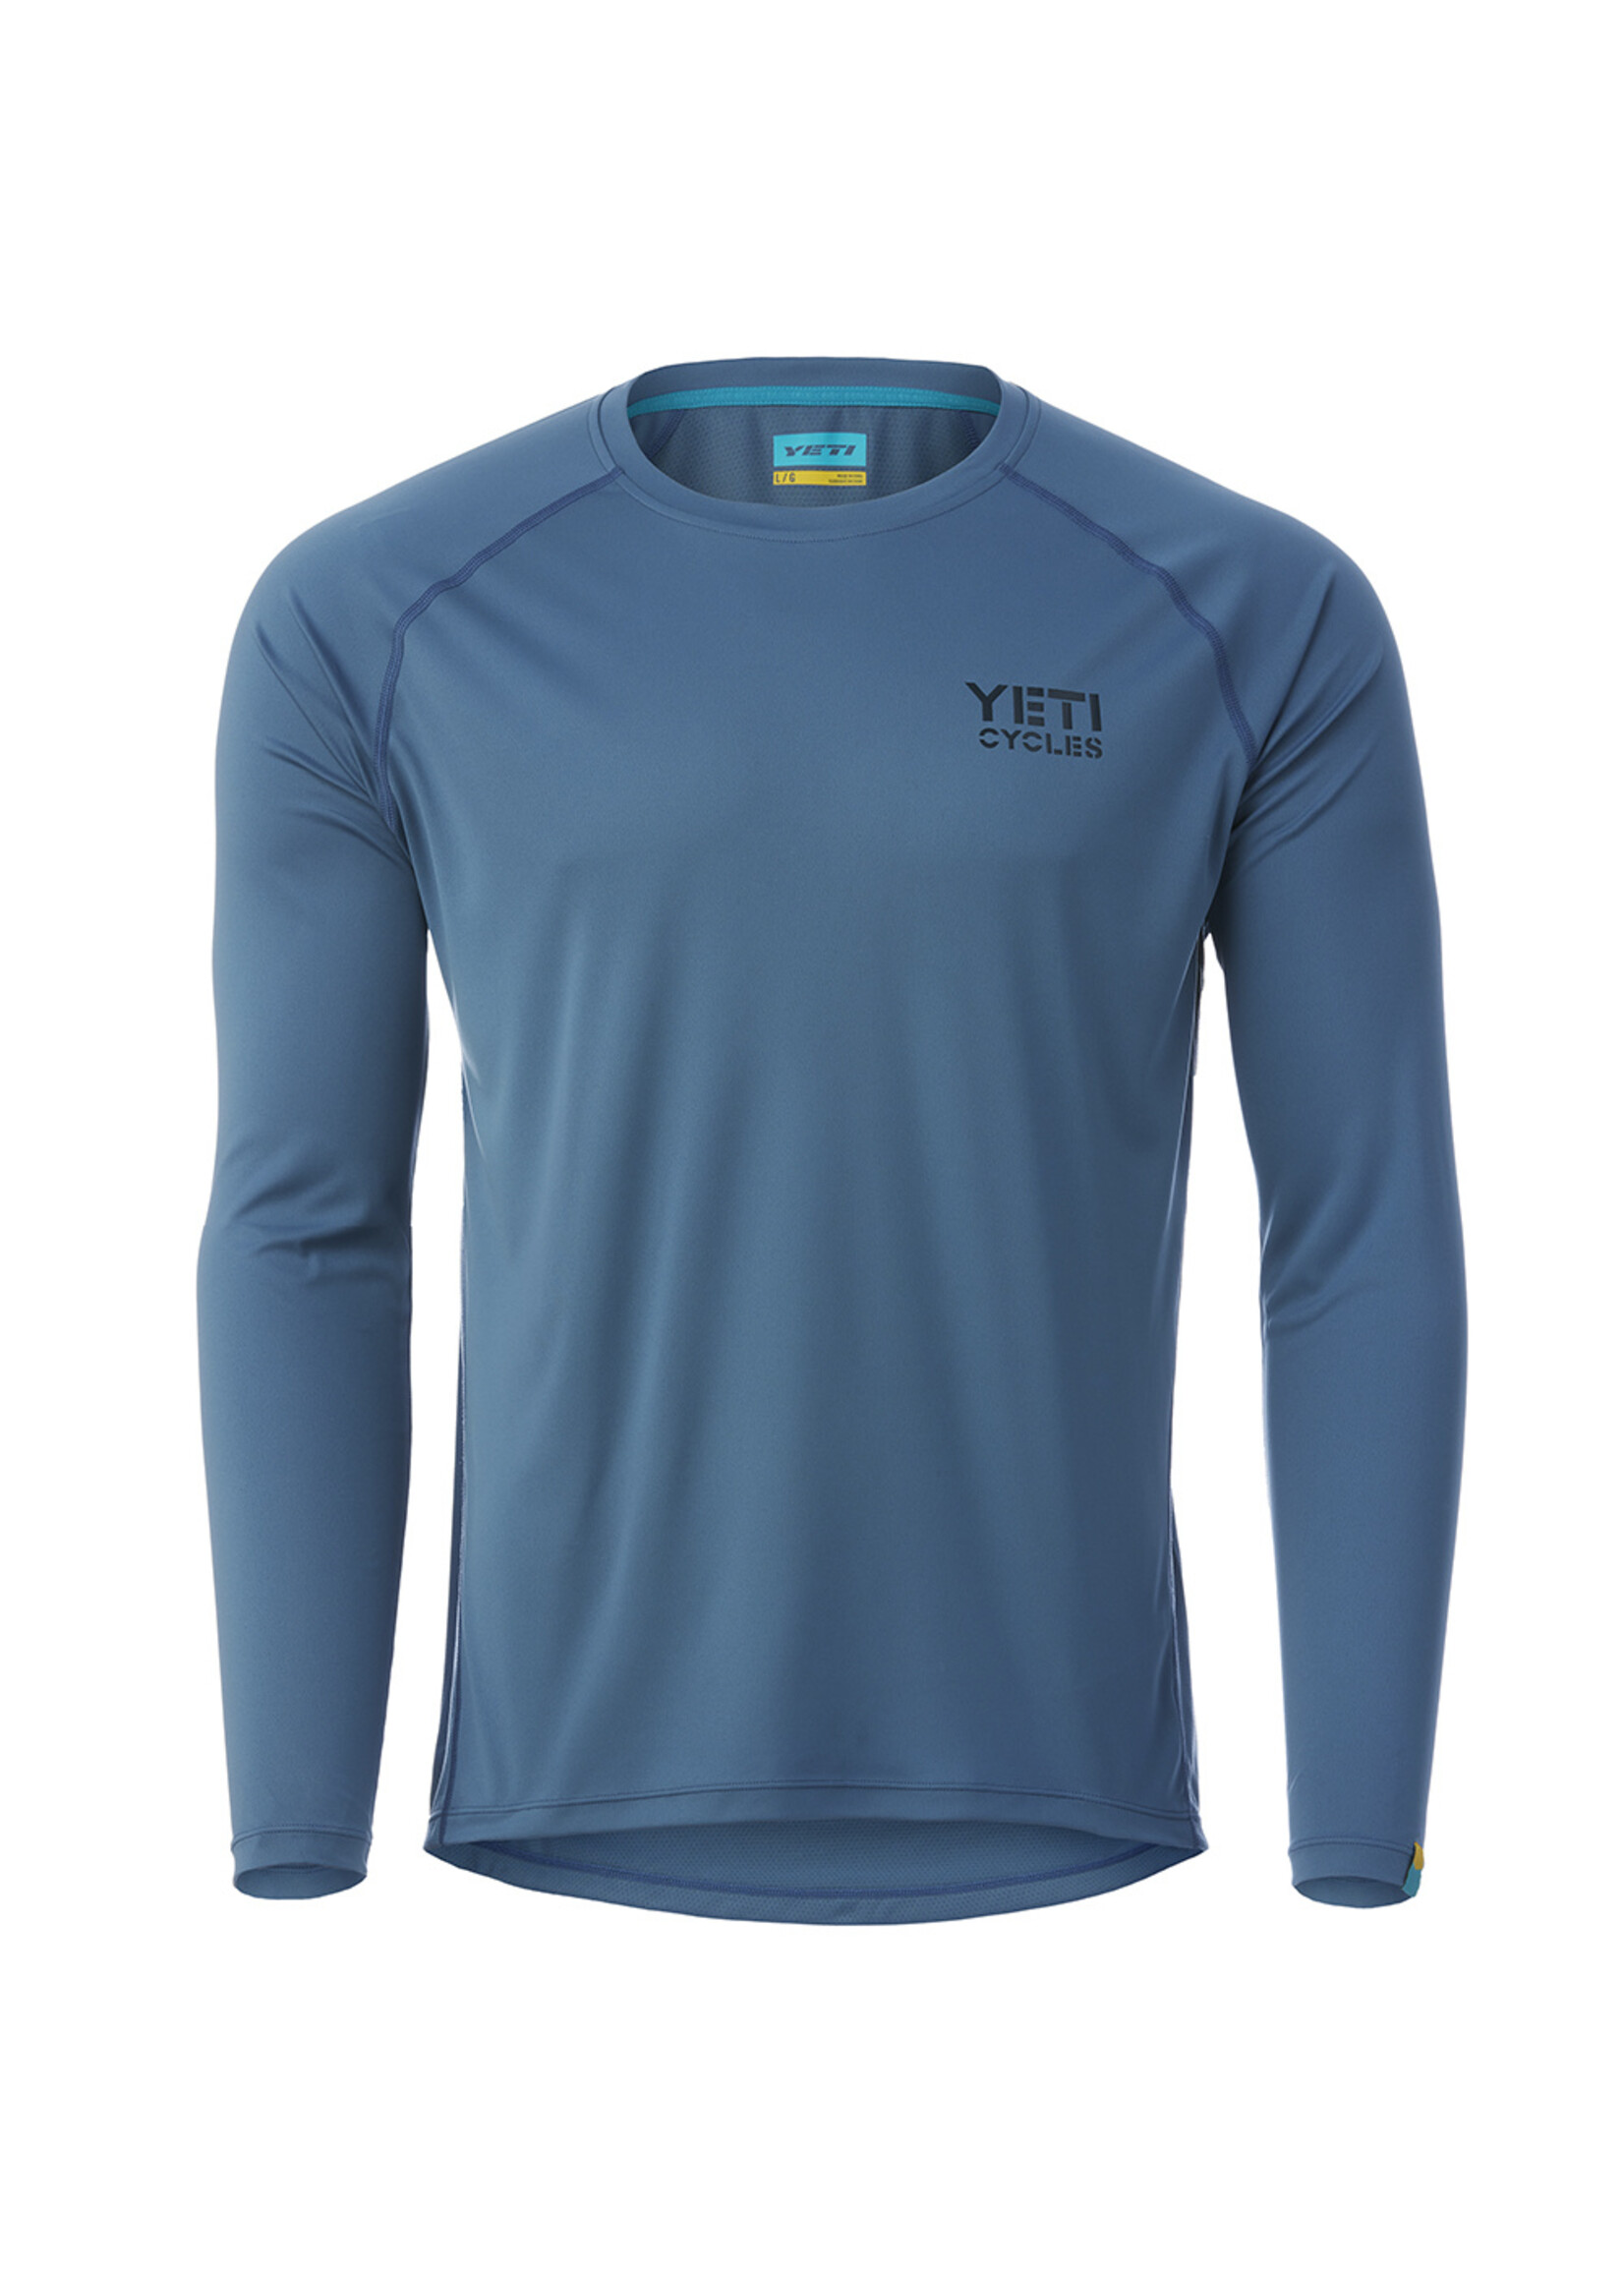 Yeti Cycles TOLLAND L/S JERSEY